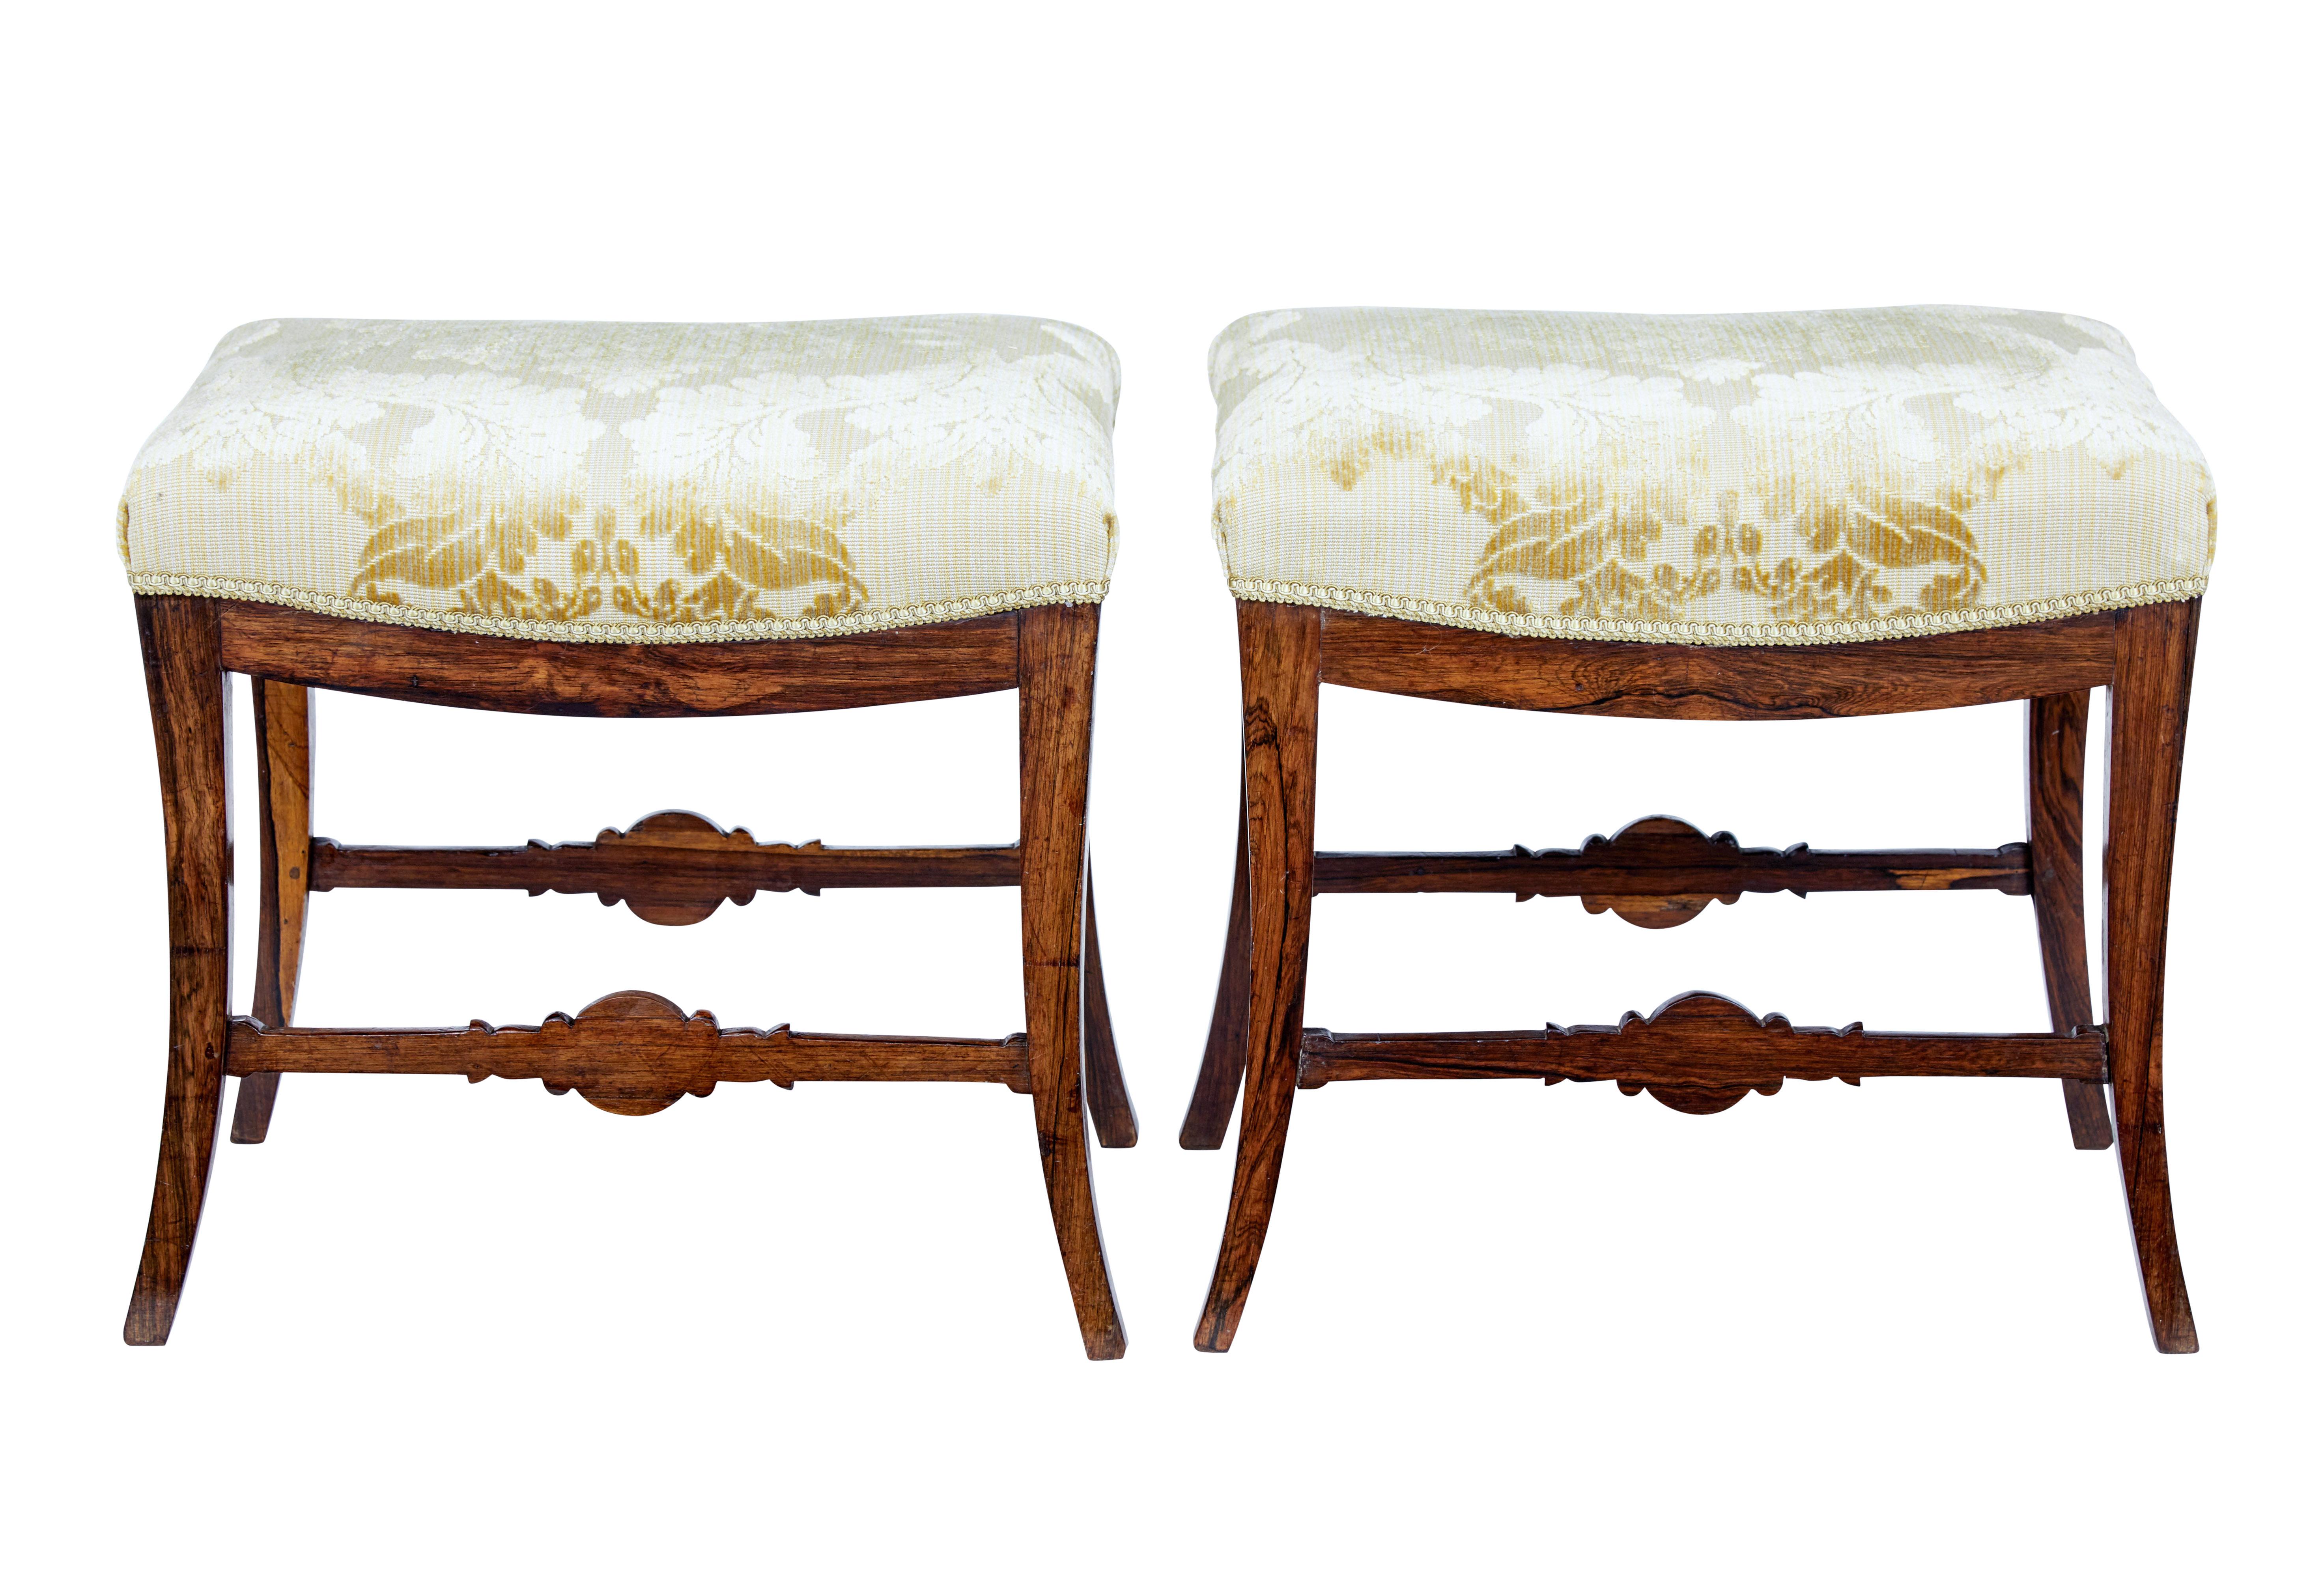 Pair of mid 19th century palisander stools circa 1860.

Fine quality pair of matching stools from the mid-19th century. Frames made from solid palisander with tapered legs and detailed stretcher. We have just had these stools re-upholstered in a